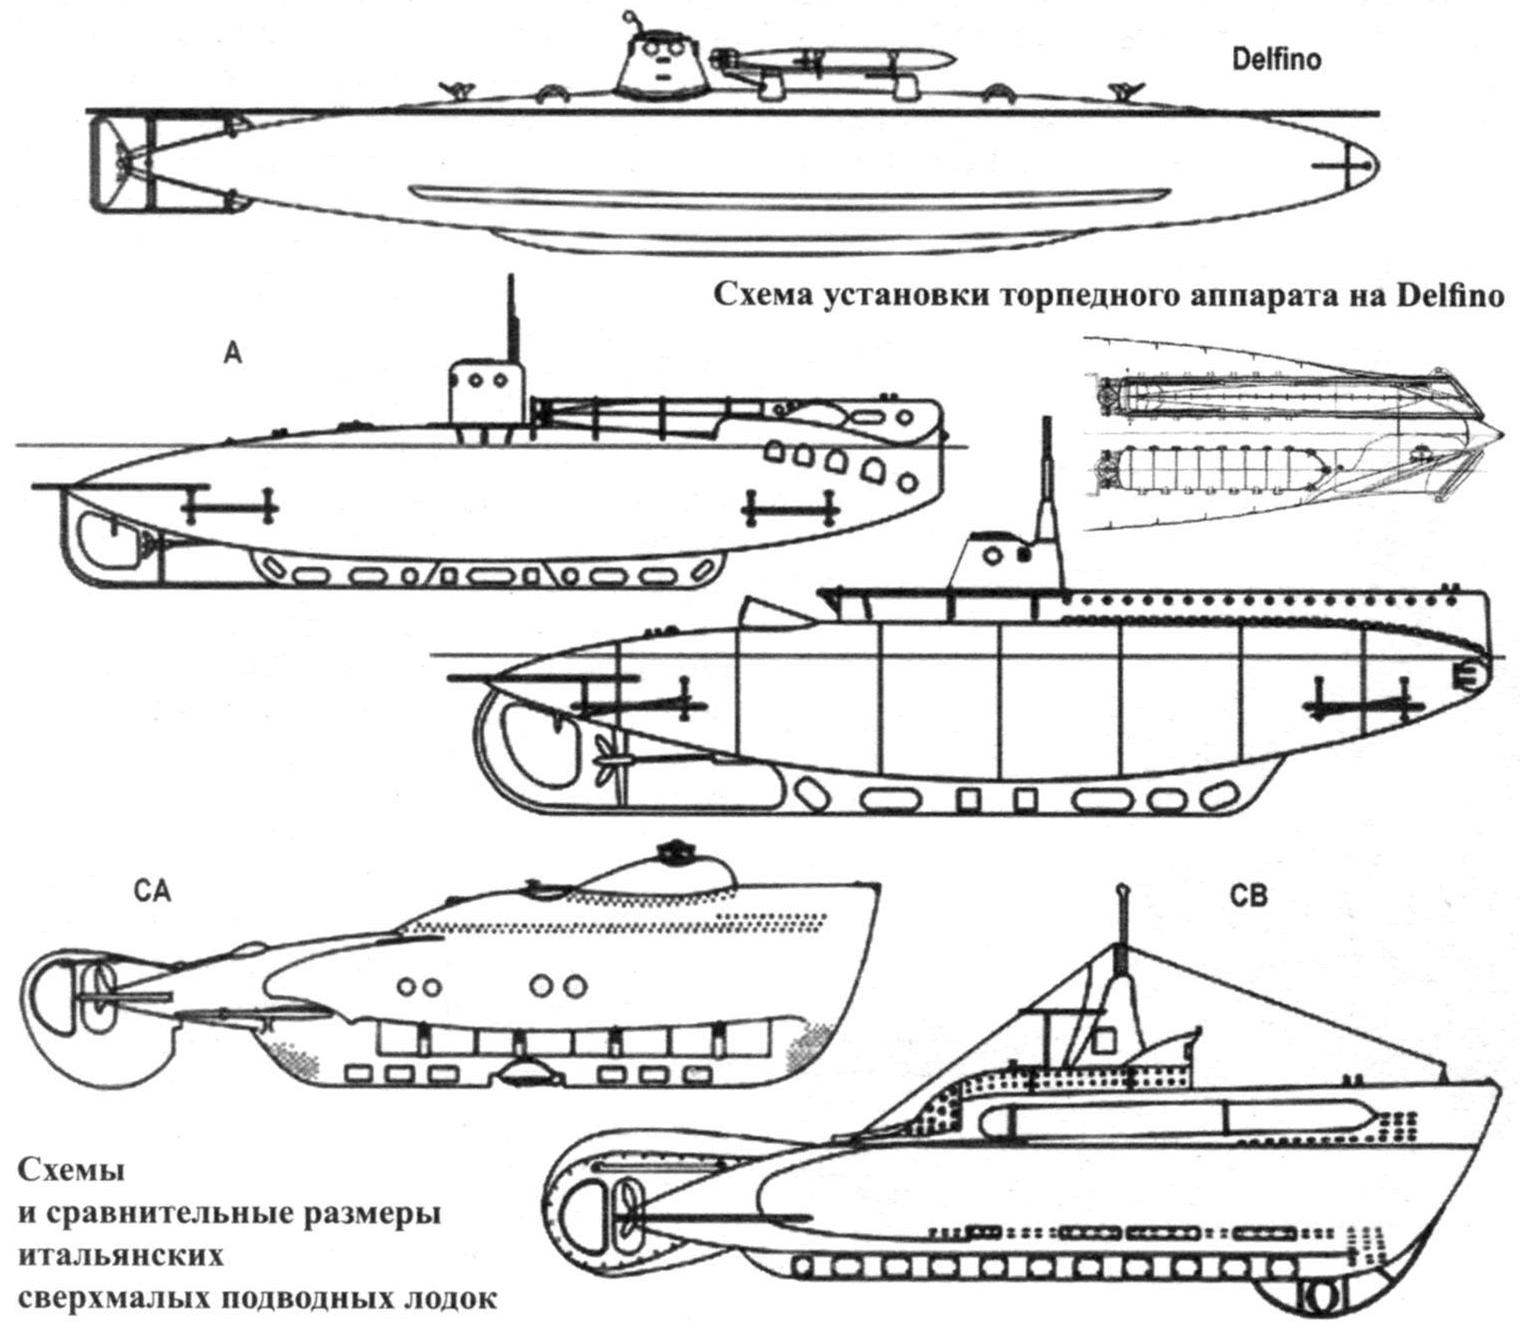 Schemes and the relative size of the Italian midget submarines